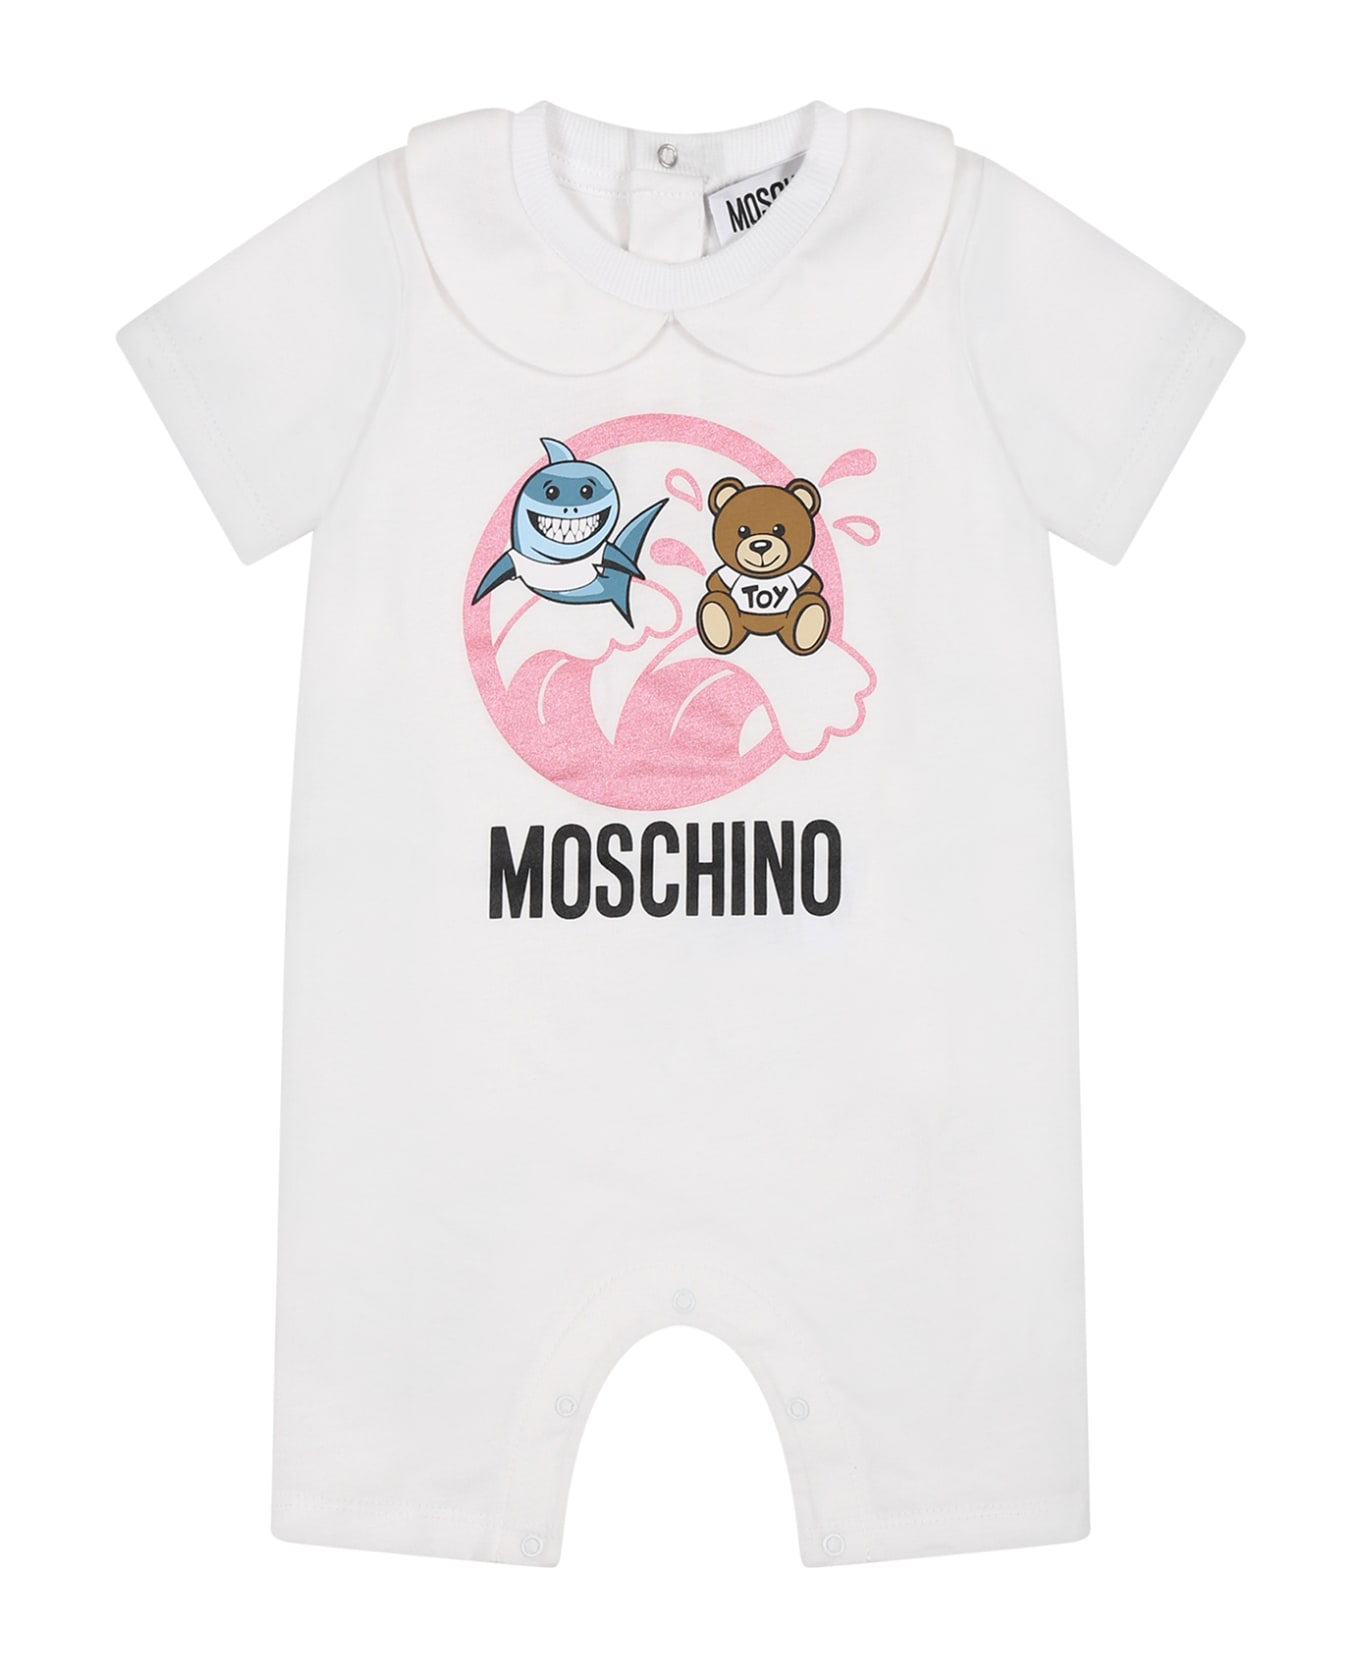 Moschino Pink Set For Baby Girl With Print And Teddy Bear - Pink